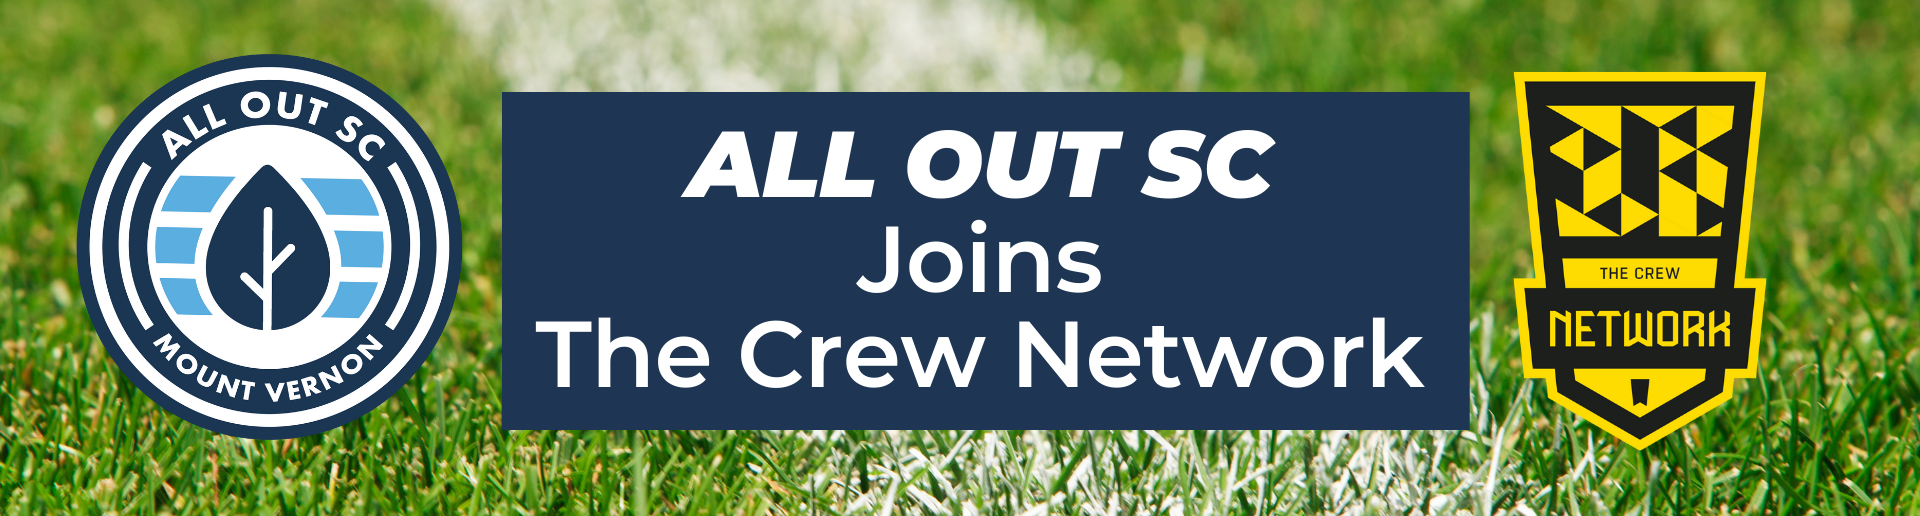 All Out SC joins the Crew Network